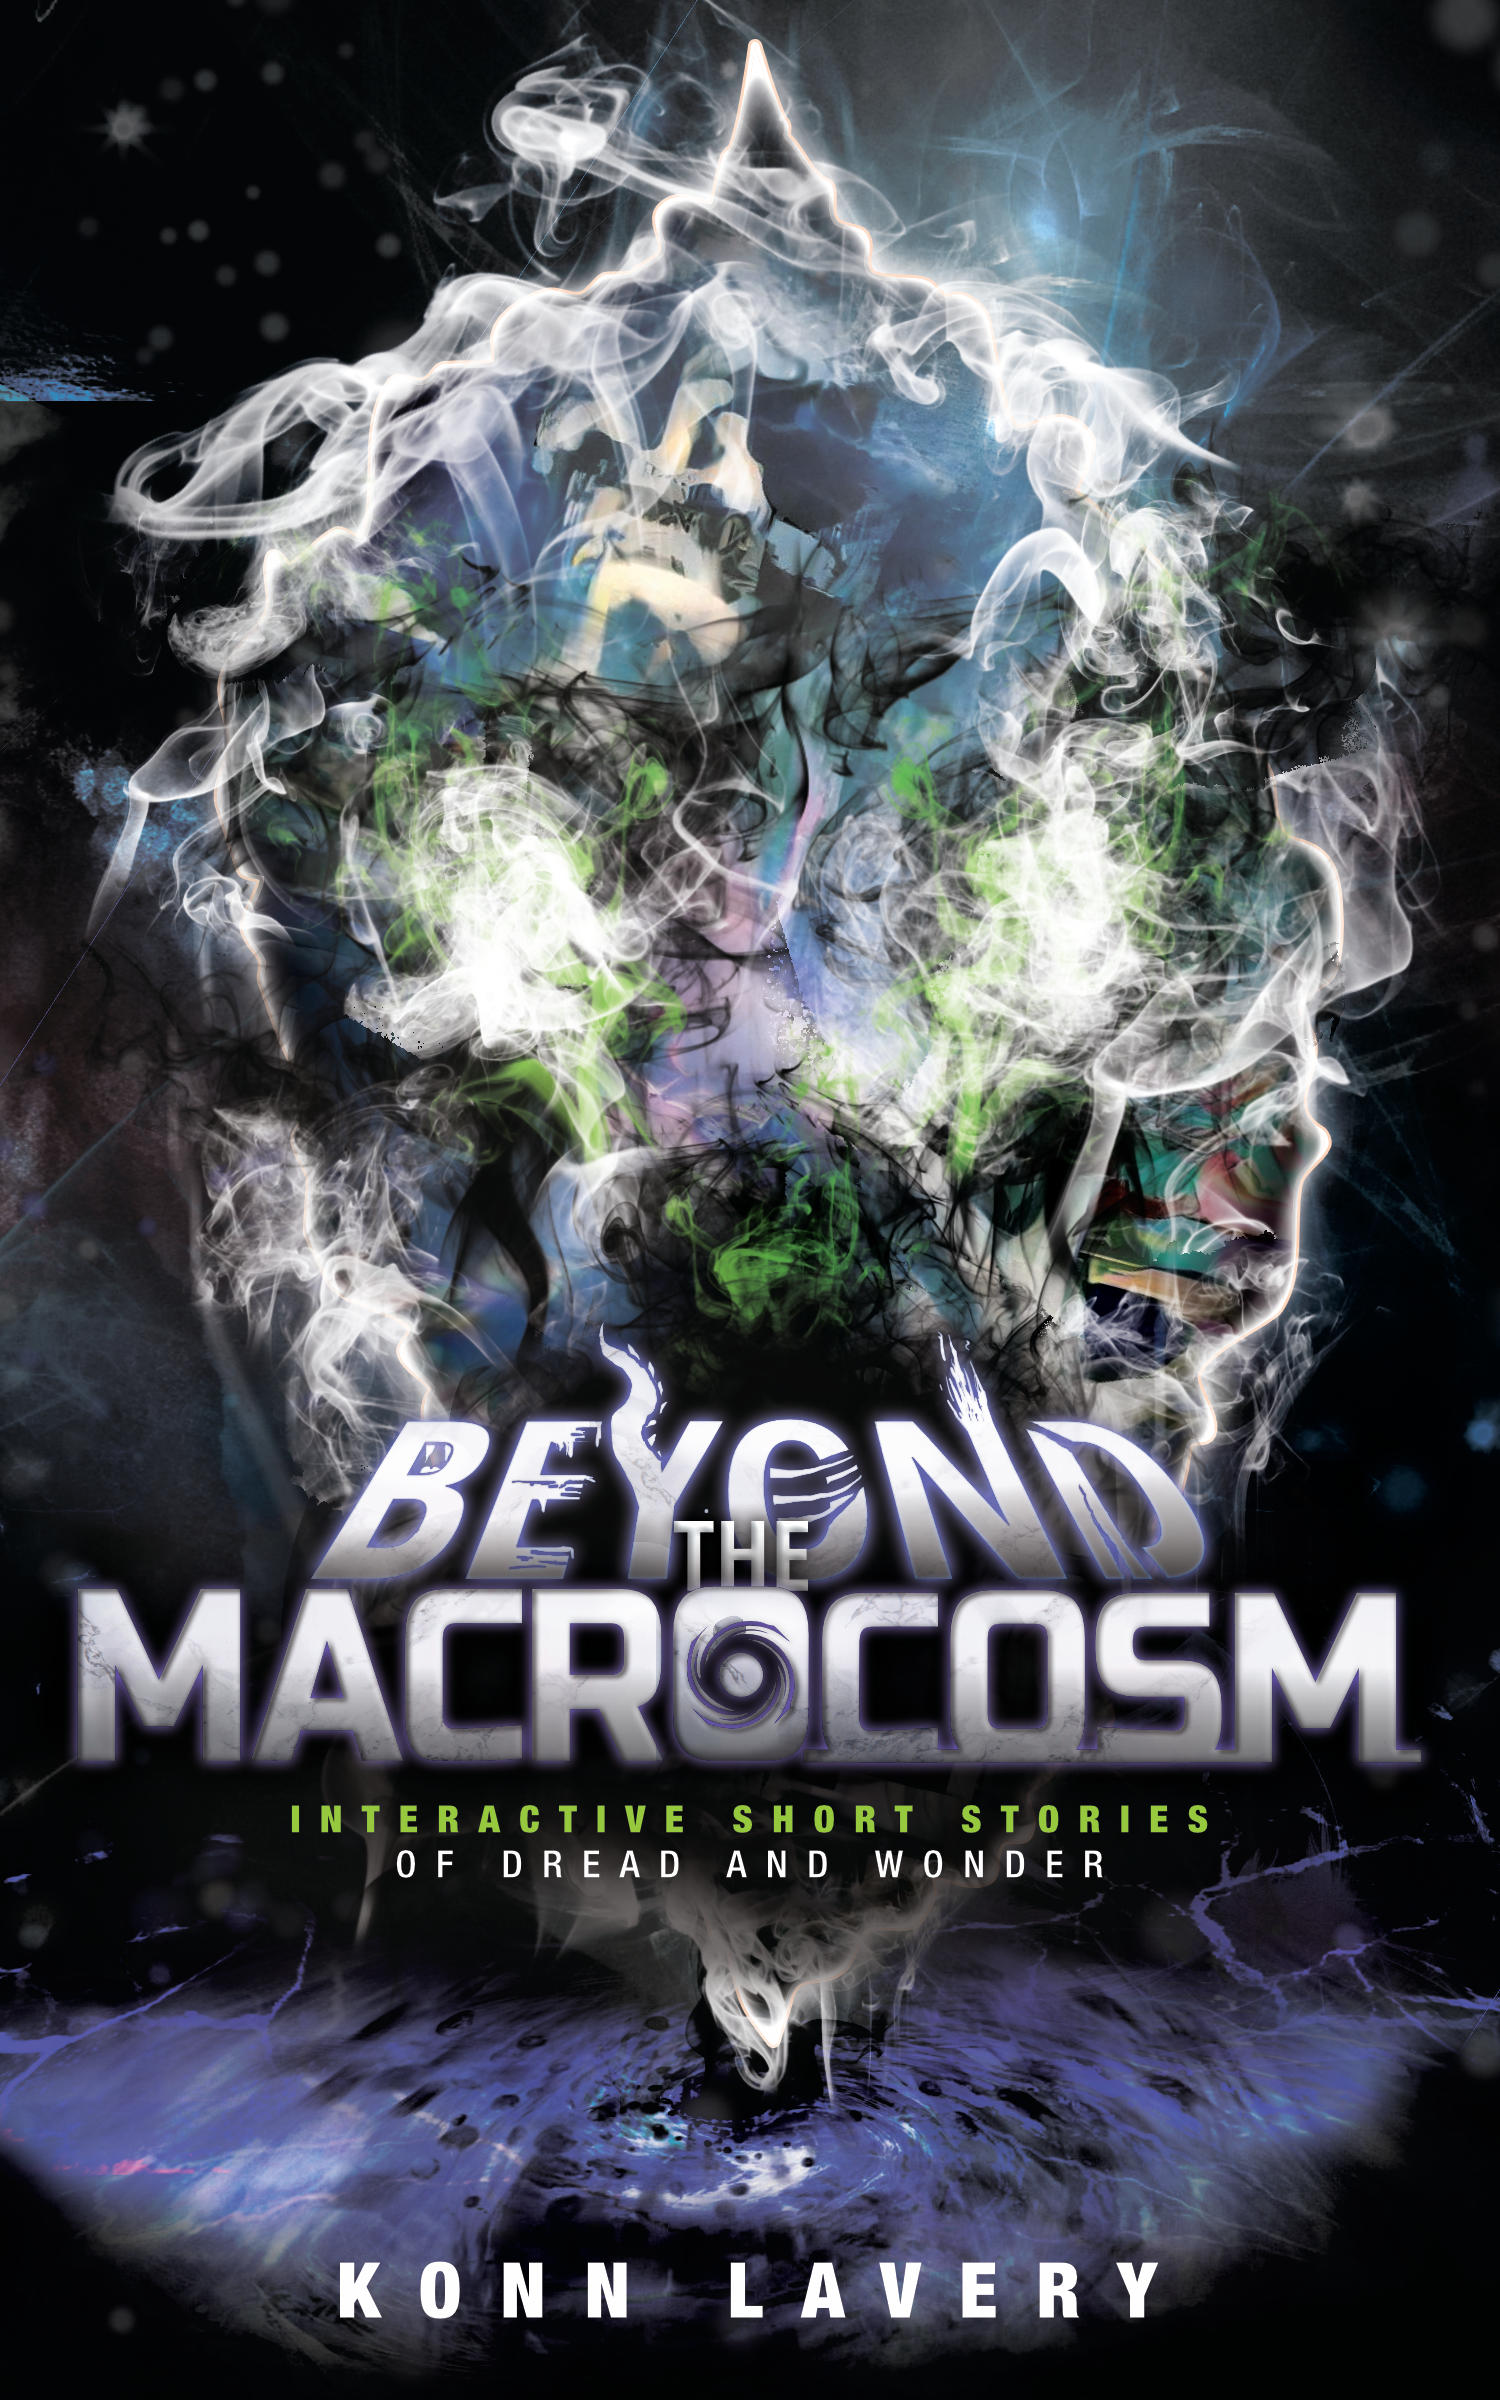  Beyond the Macrocosm Interactive Short Stories of Dread and Wonder by Konn Lavery